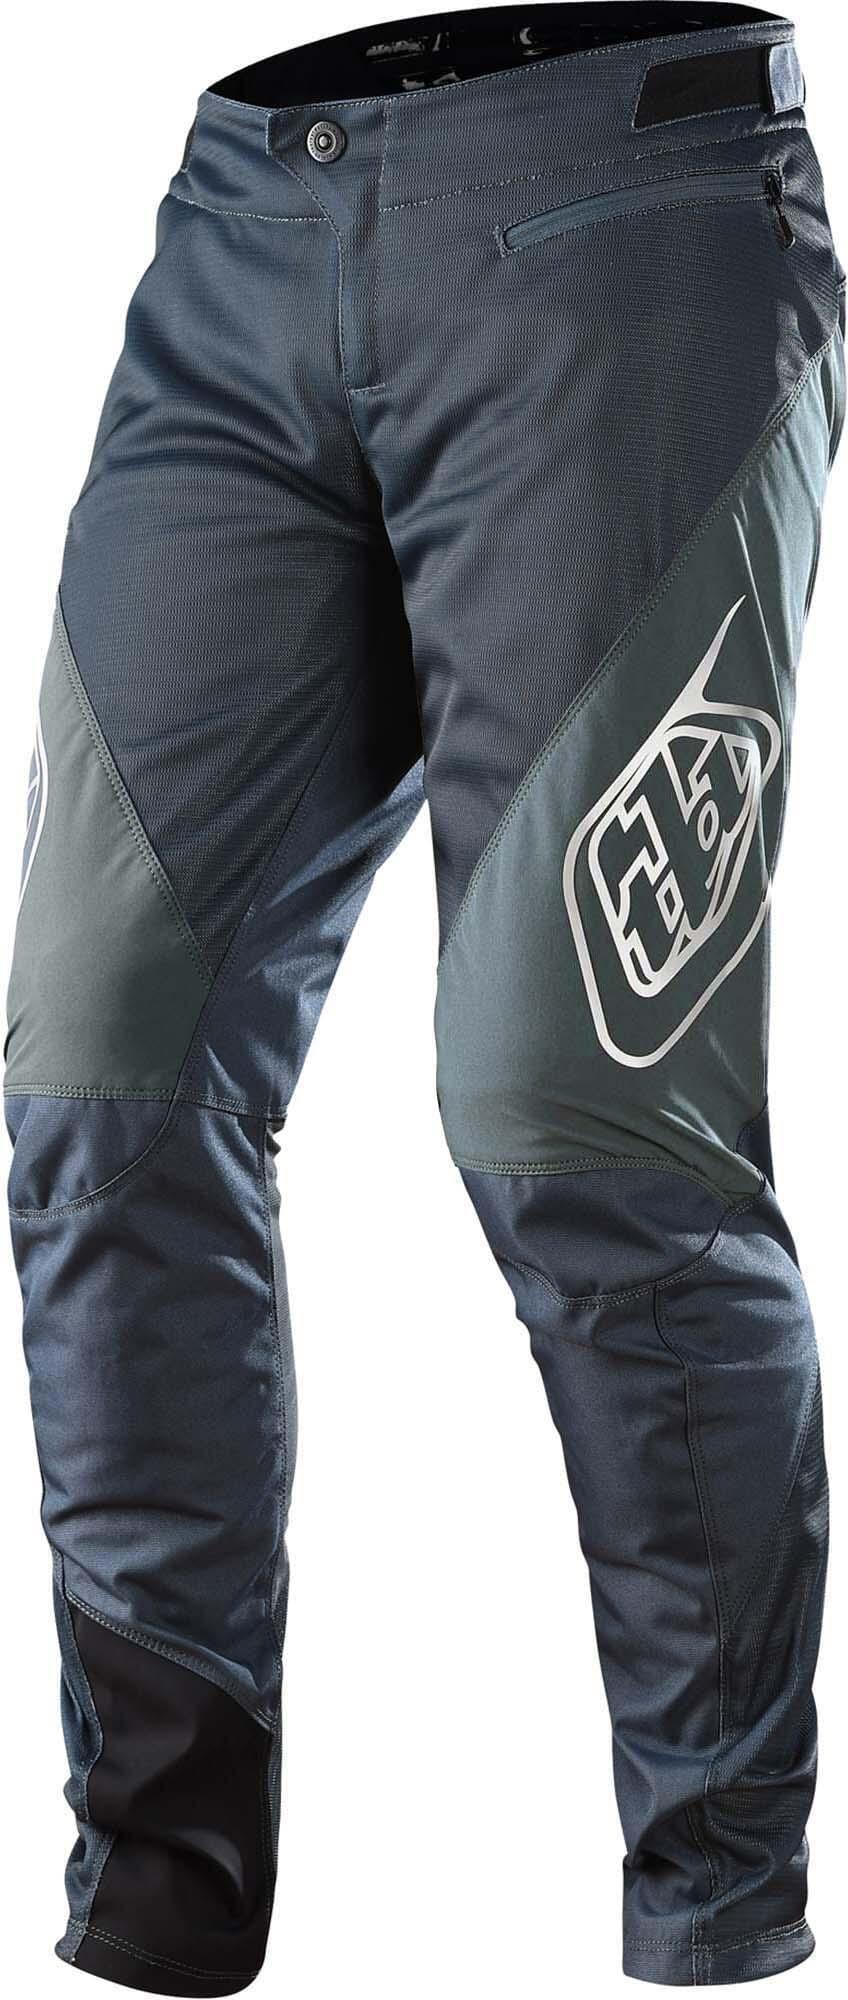 Troy Lee Designs Sprint Pant - Solid Charcoal